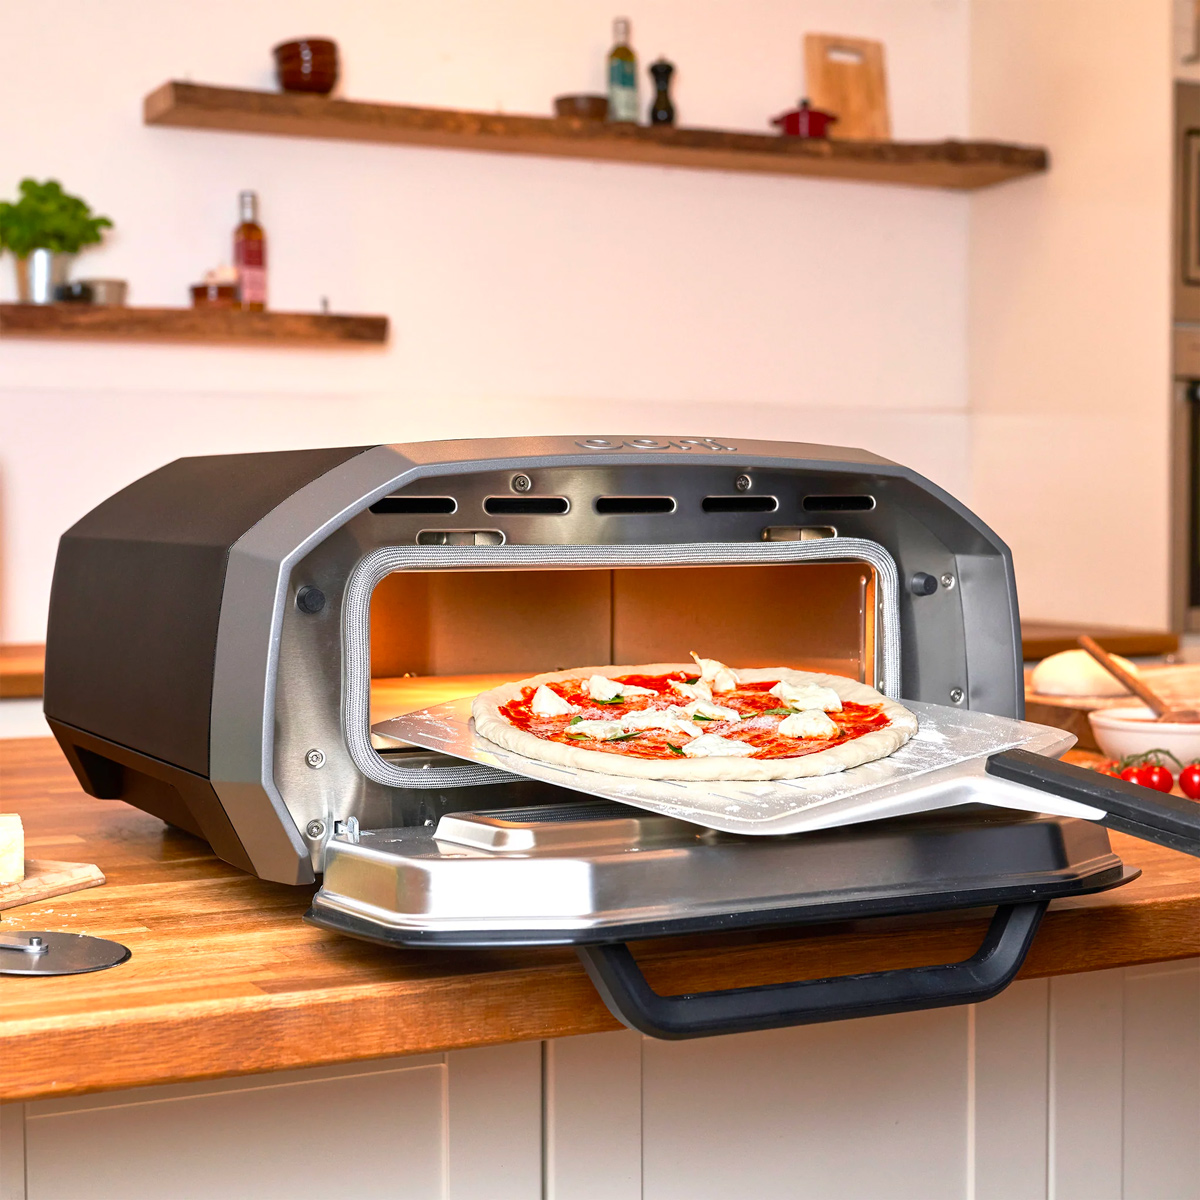 Ooni Volt is an electric pizza oven